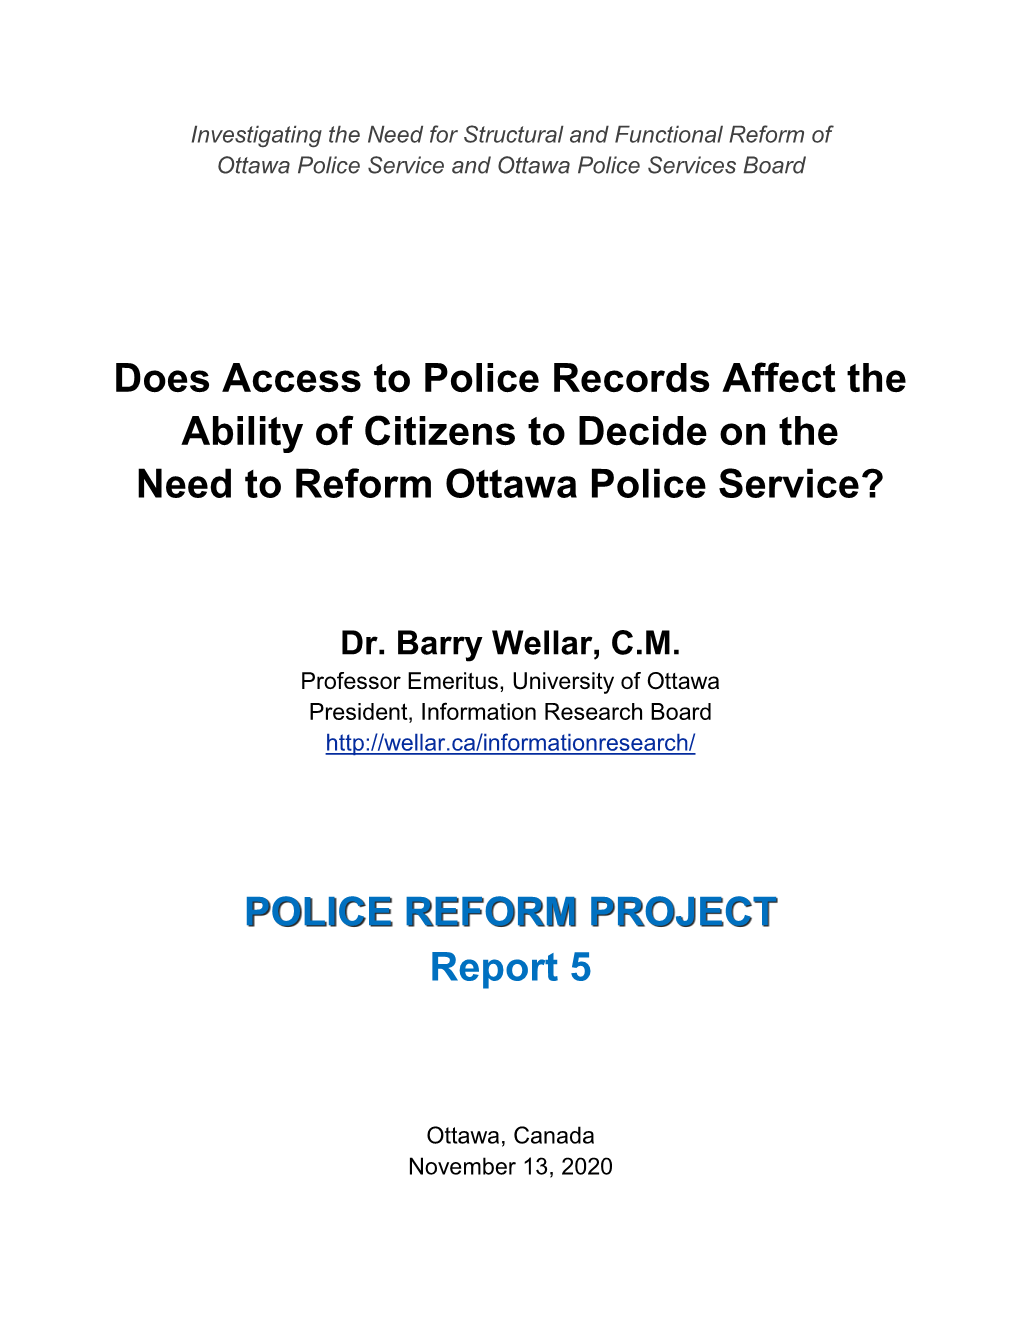 Does Access to Police Records Affect the Ability of Citizens to Decide on the Need to Reform Ottawa Police Service?